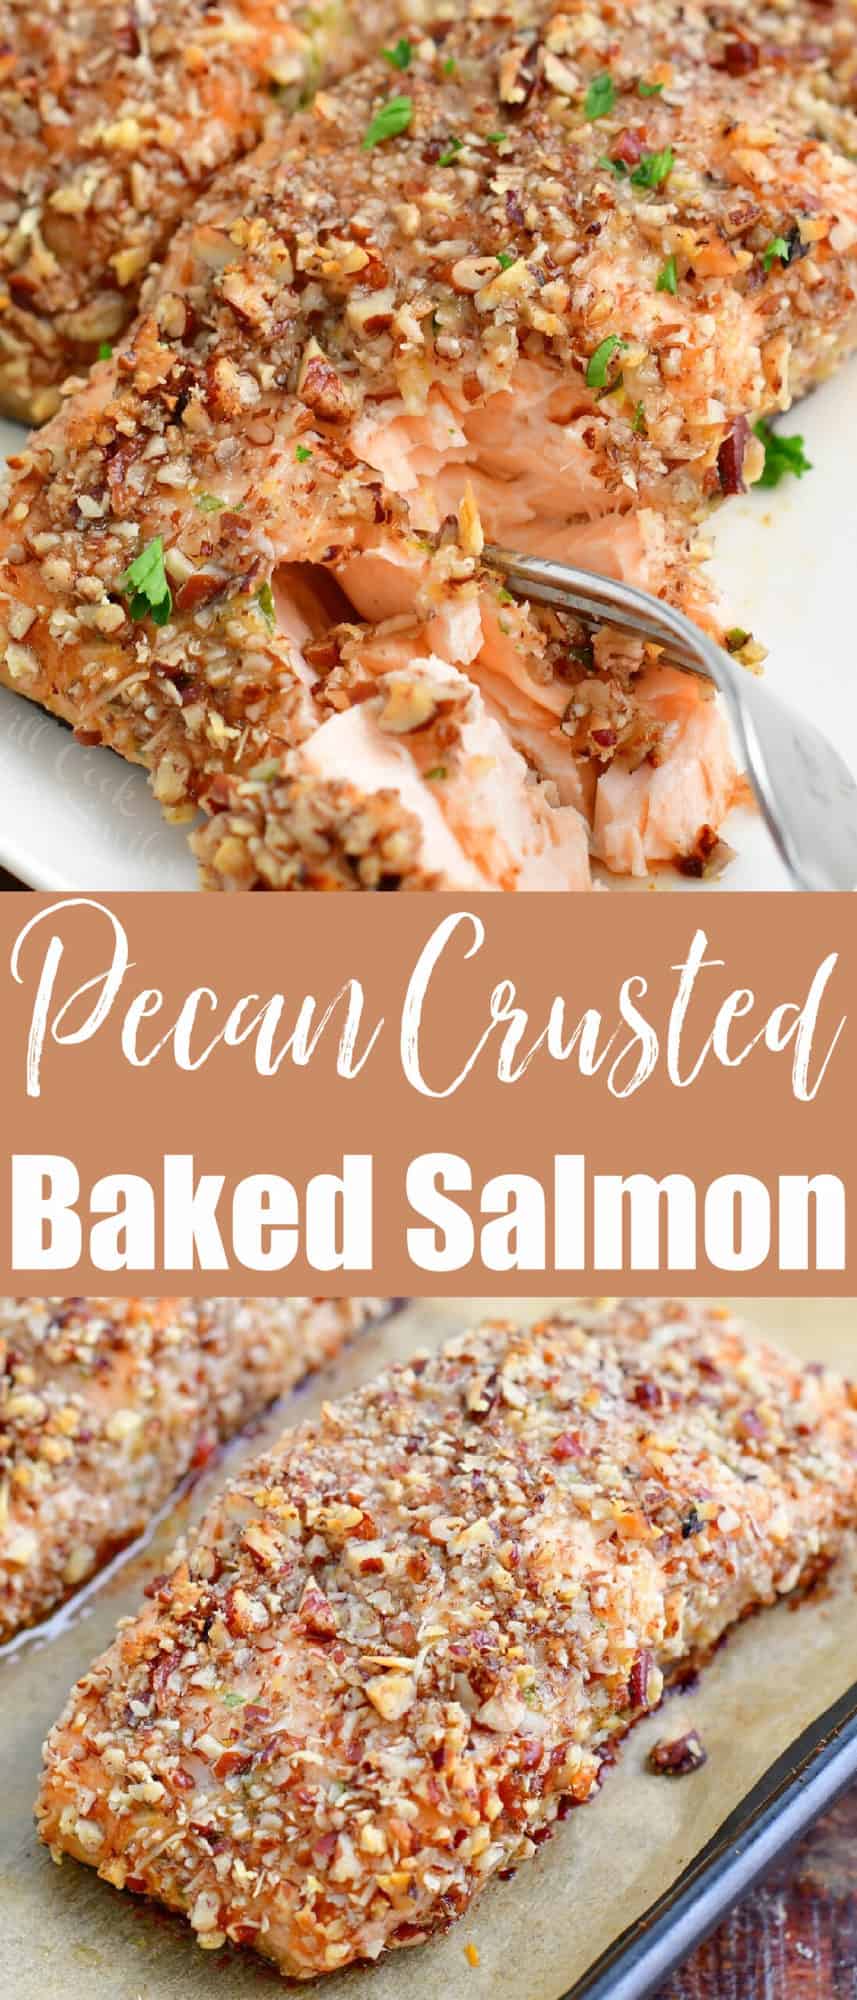 title collage image with two images of salmon flaked off and salmon in the baking pan